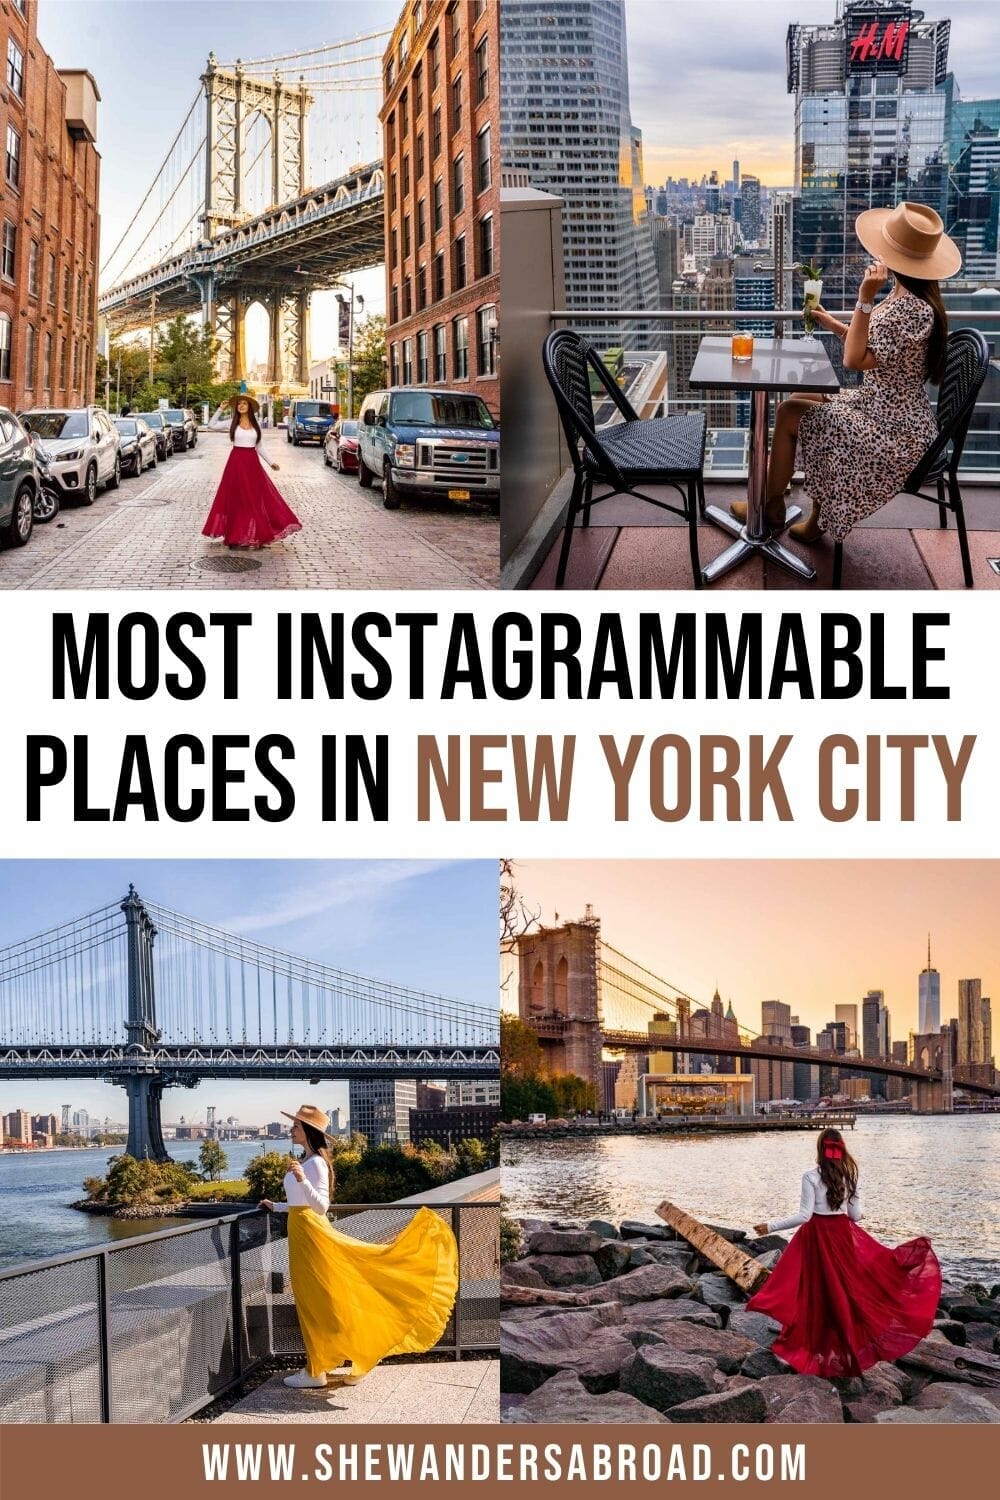 25 Most Instagrammable Places in NYC You Can't Miss